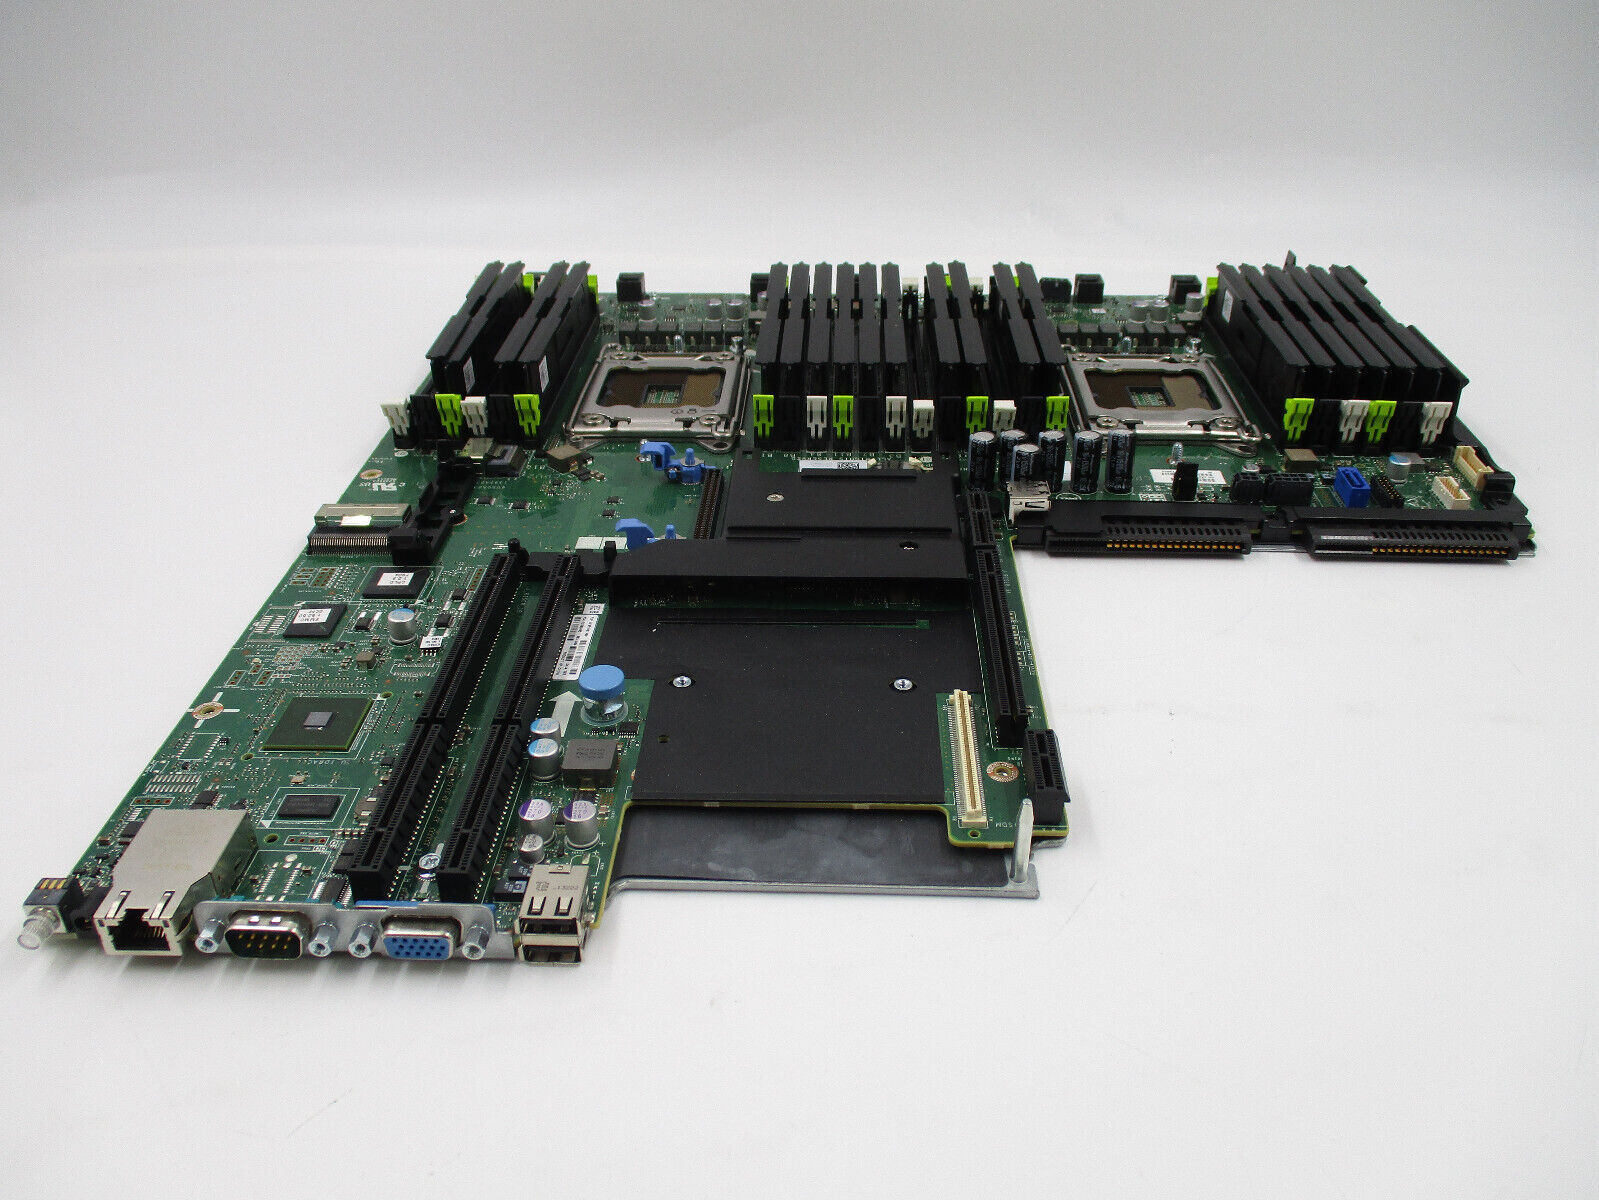 Dell PowerEdge R620 DDR3 LGA 2011 Server Motherboard DP/N: 0PXXHP Tested Working